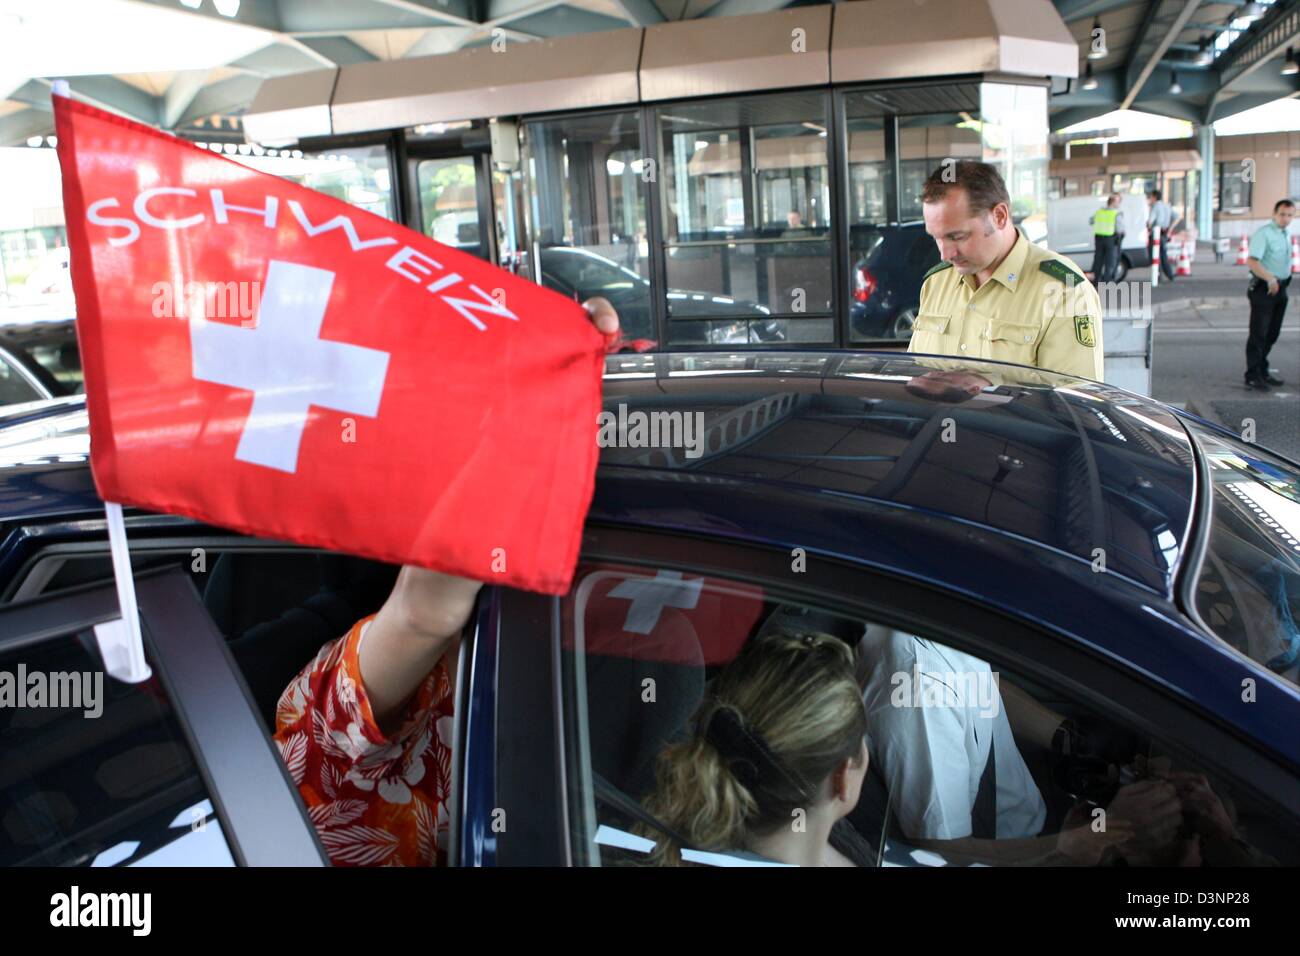 A German border control officer checks the documents of Swiss soccer fans at the German-Swiss border control station Basel-Weil am Rhein, Germany, Tuesday, 13 June 2006. Police and border control intesified the controls at the borders of Switzerland and France due to the FIFA World Cup Group G match France vs Switzerland today in Stuttgart, Germany. Photo: Rolf Haid Stock Photo